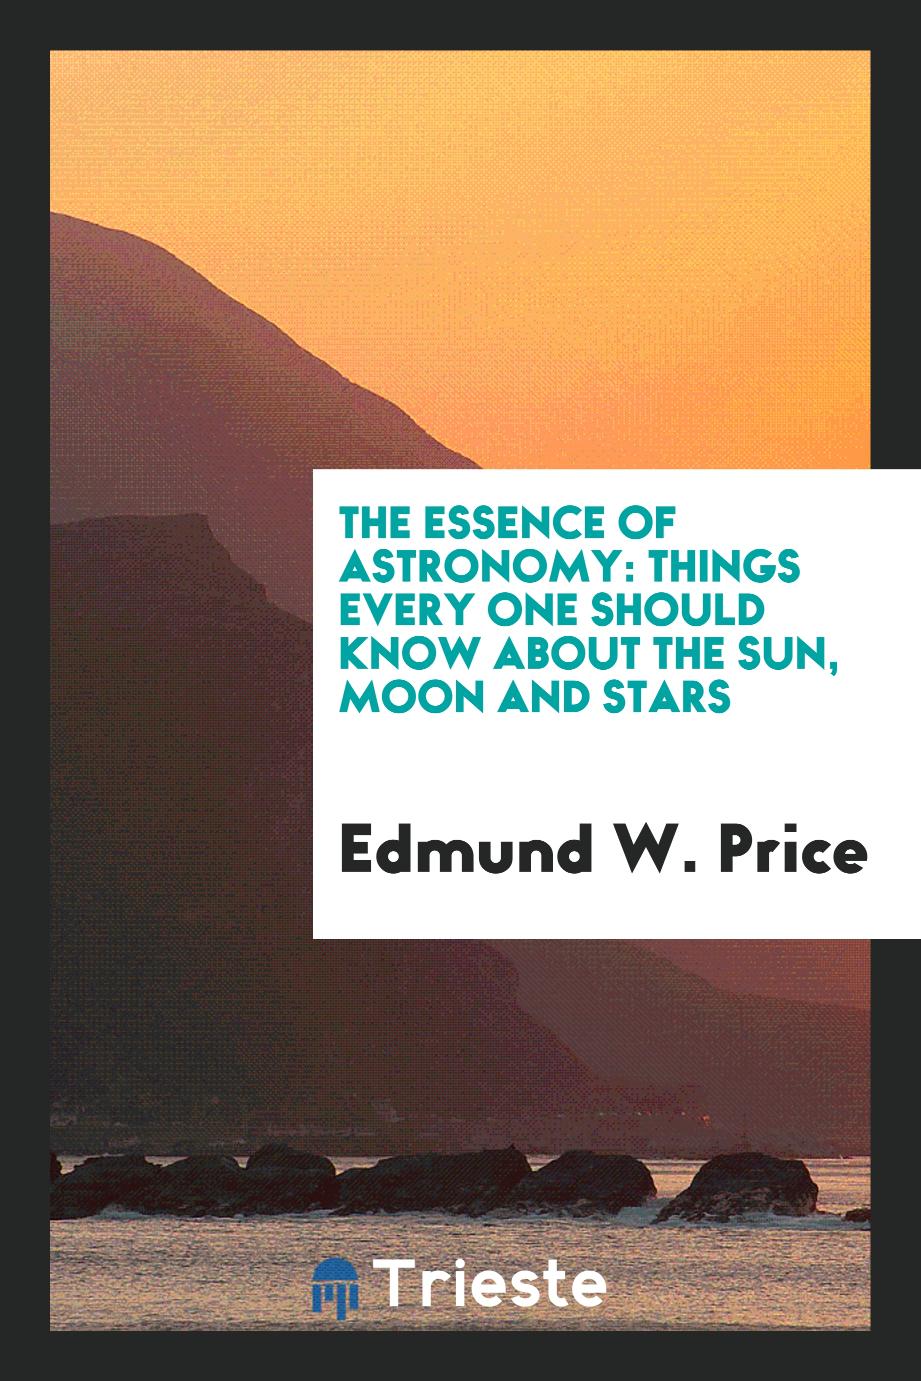 Edmund W. Price - The Essence of Astronomy: Things Every One Should Know about the Sun, Moon and Stars